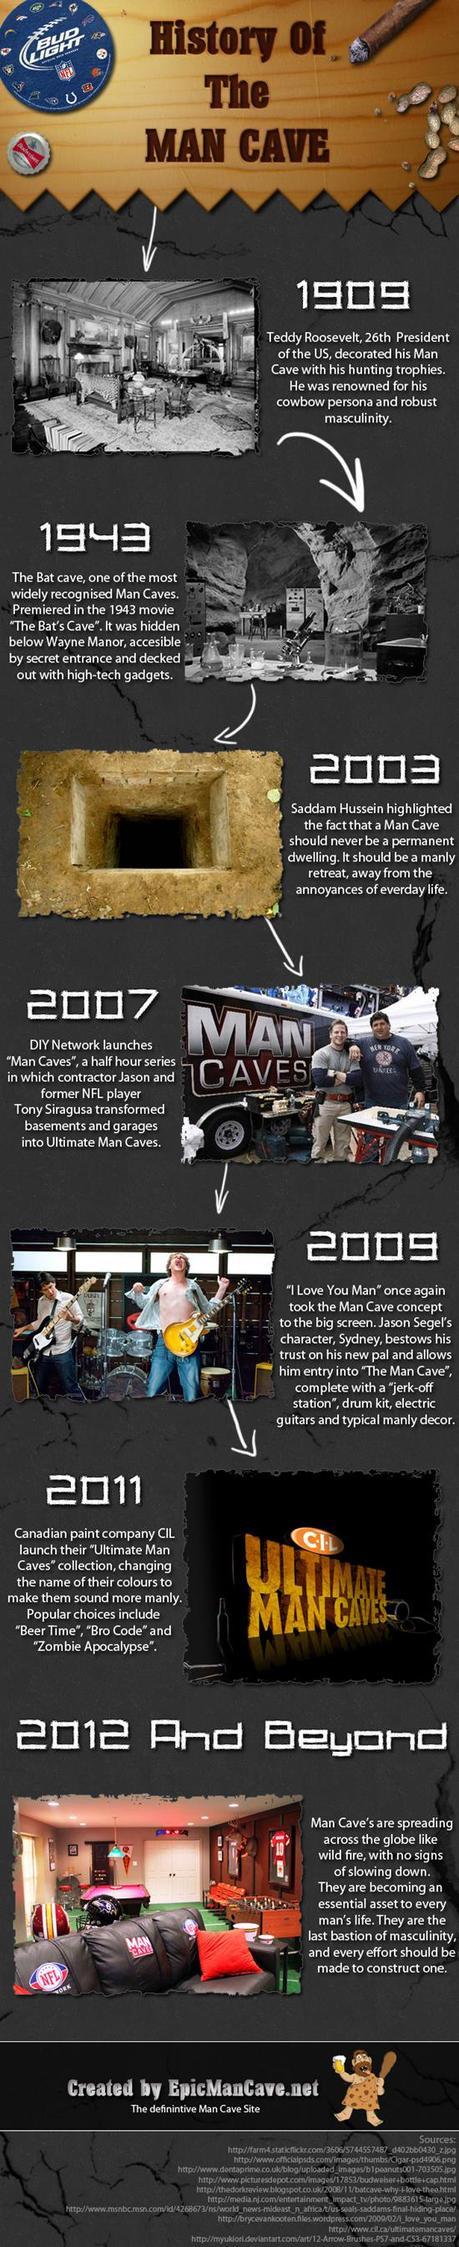 Man Caves Infographic